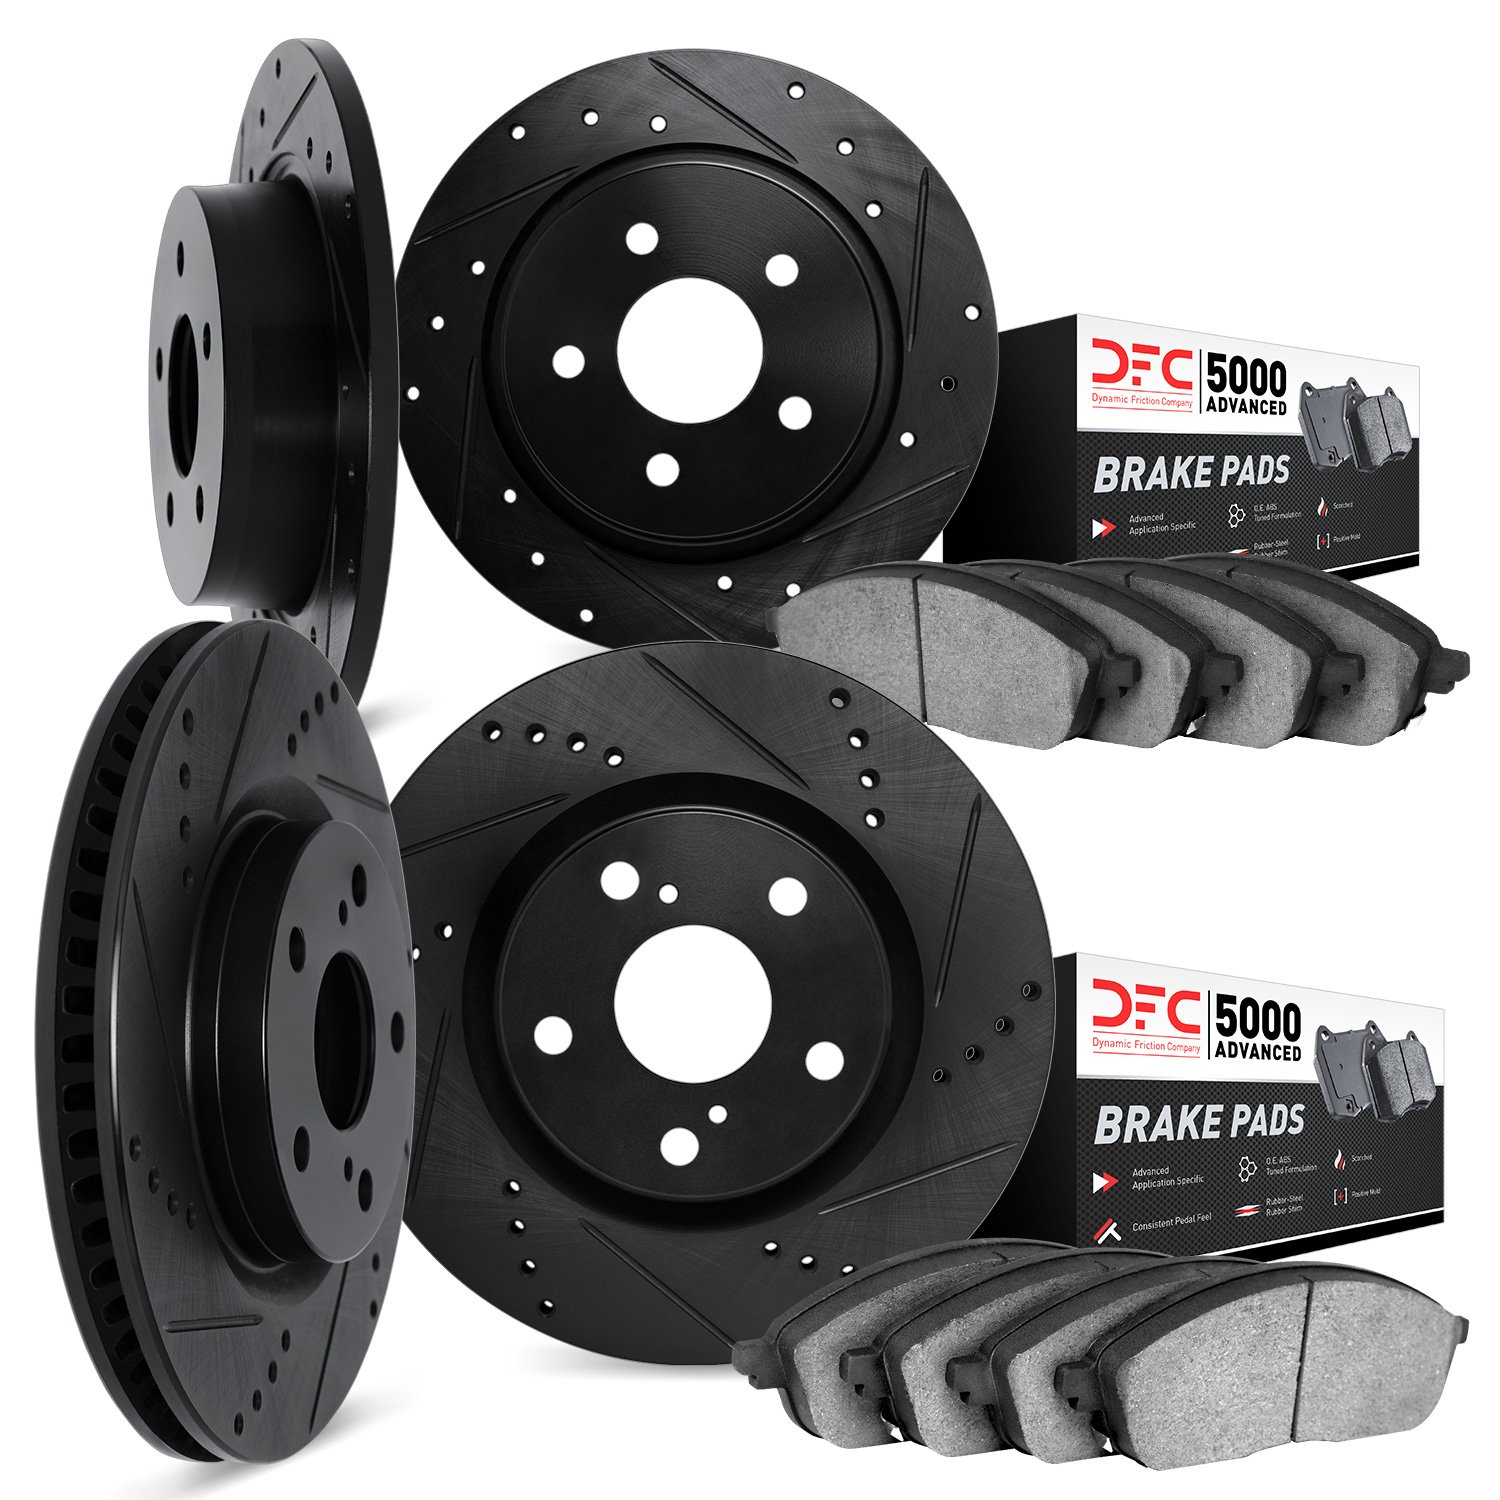 8504-65002 Drilled/Slotted Brake Rotors w/5000 Advanced Brake Pads Kit [Black], 1994-1996 GM, Position: Front and Rear